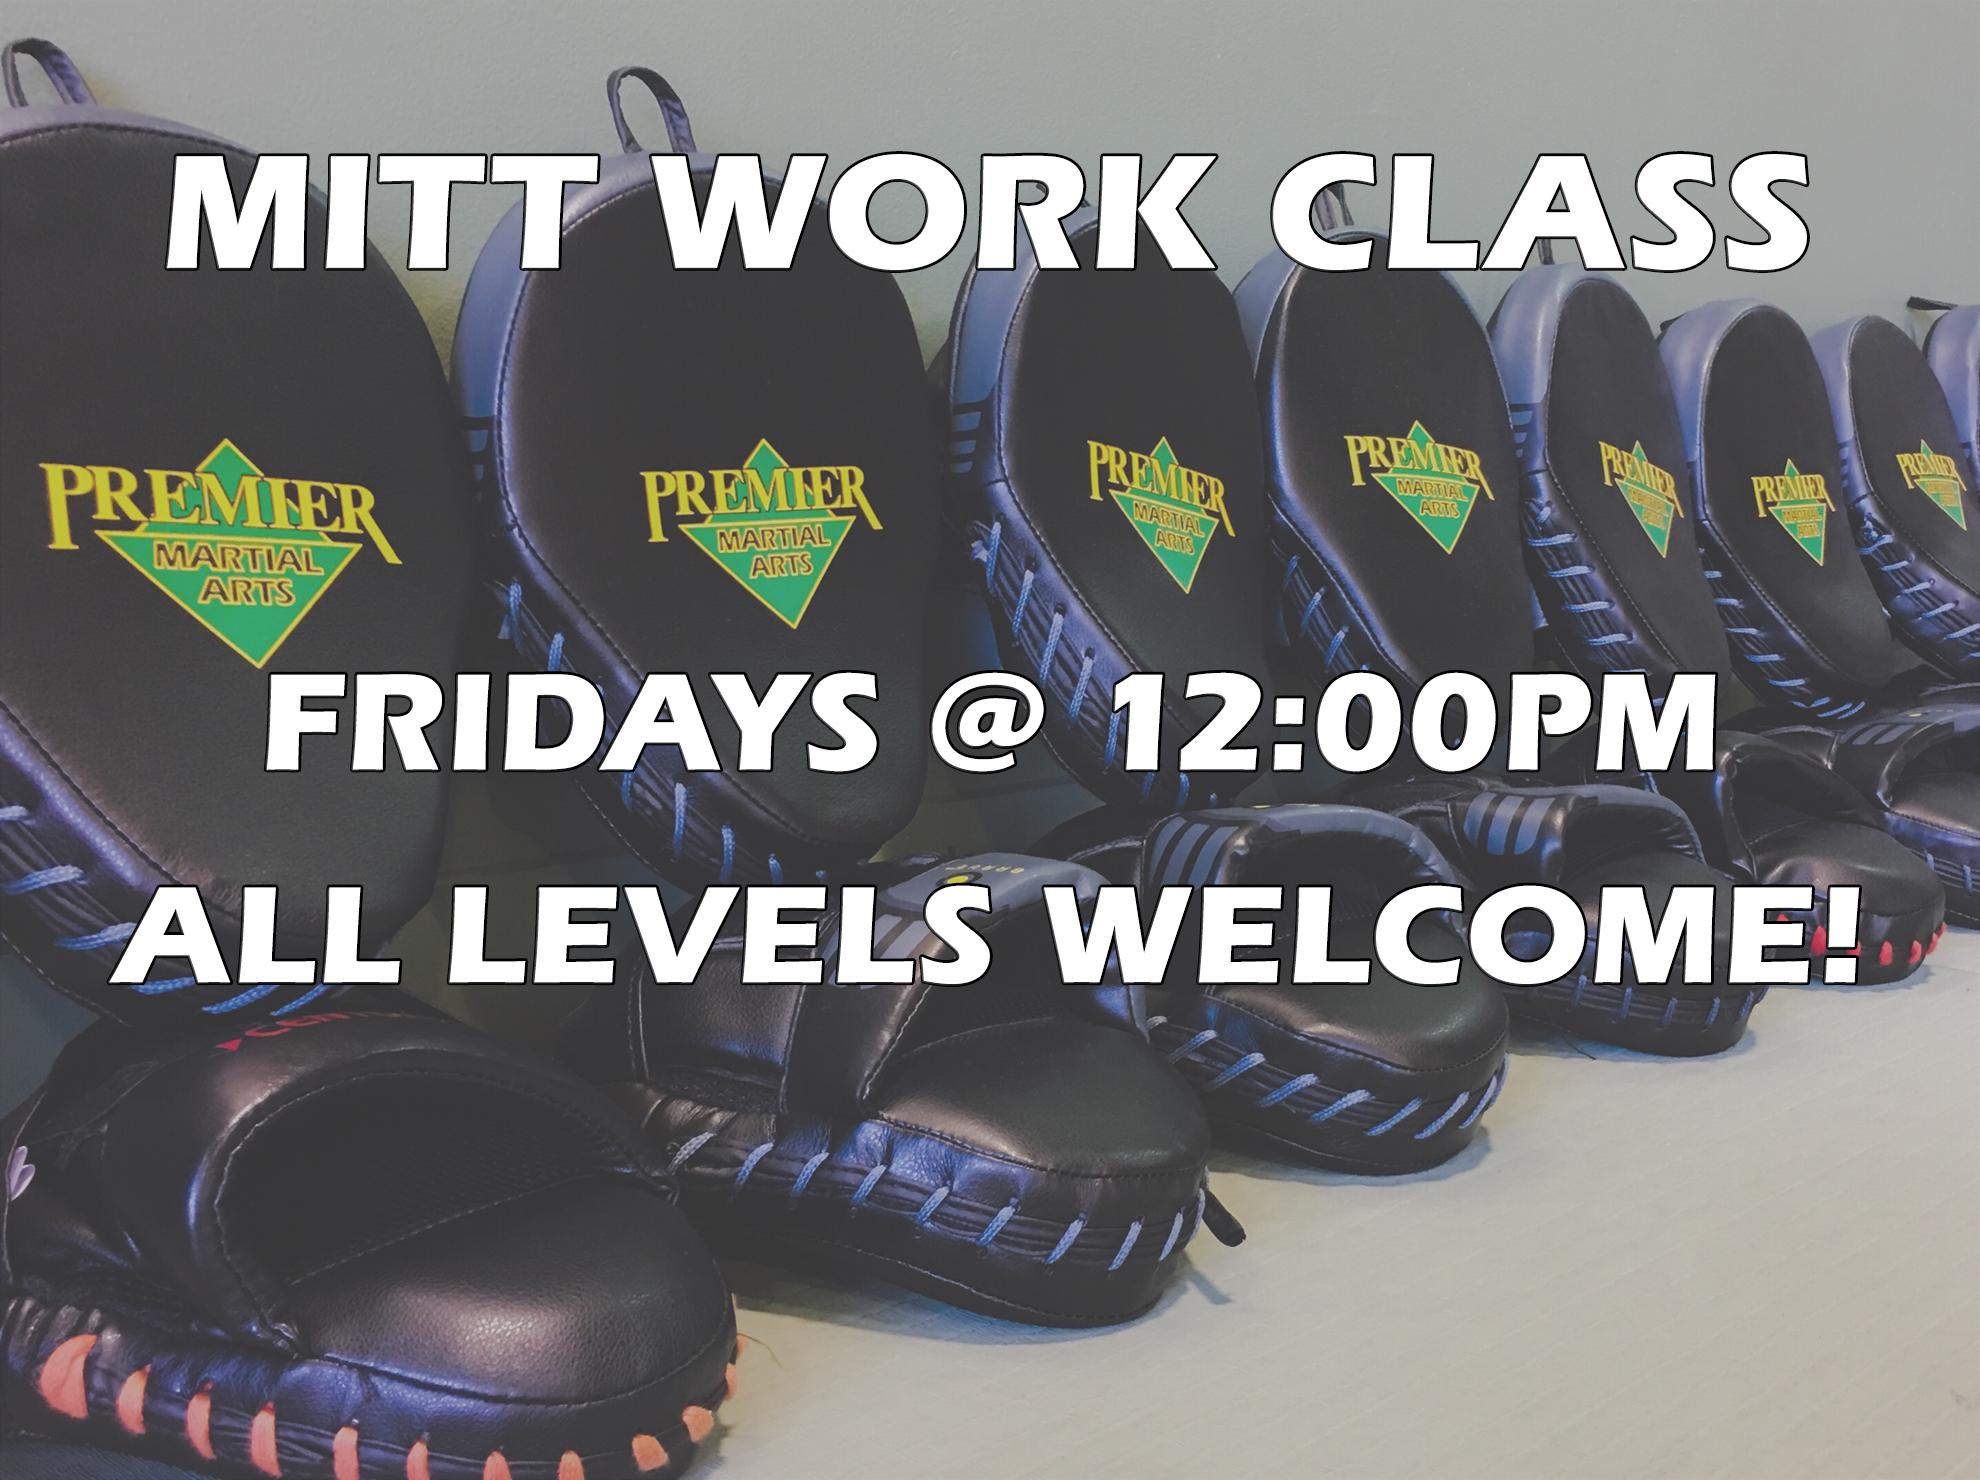 Mittwork Class - ALL LEVELS WELCOME